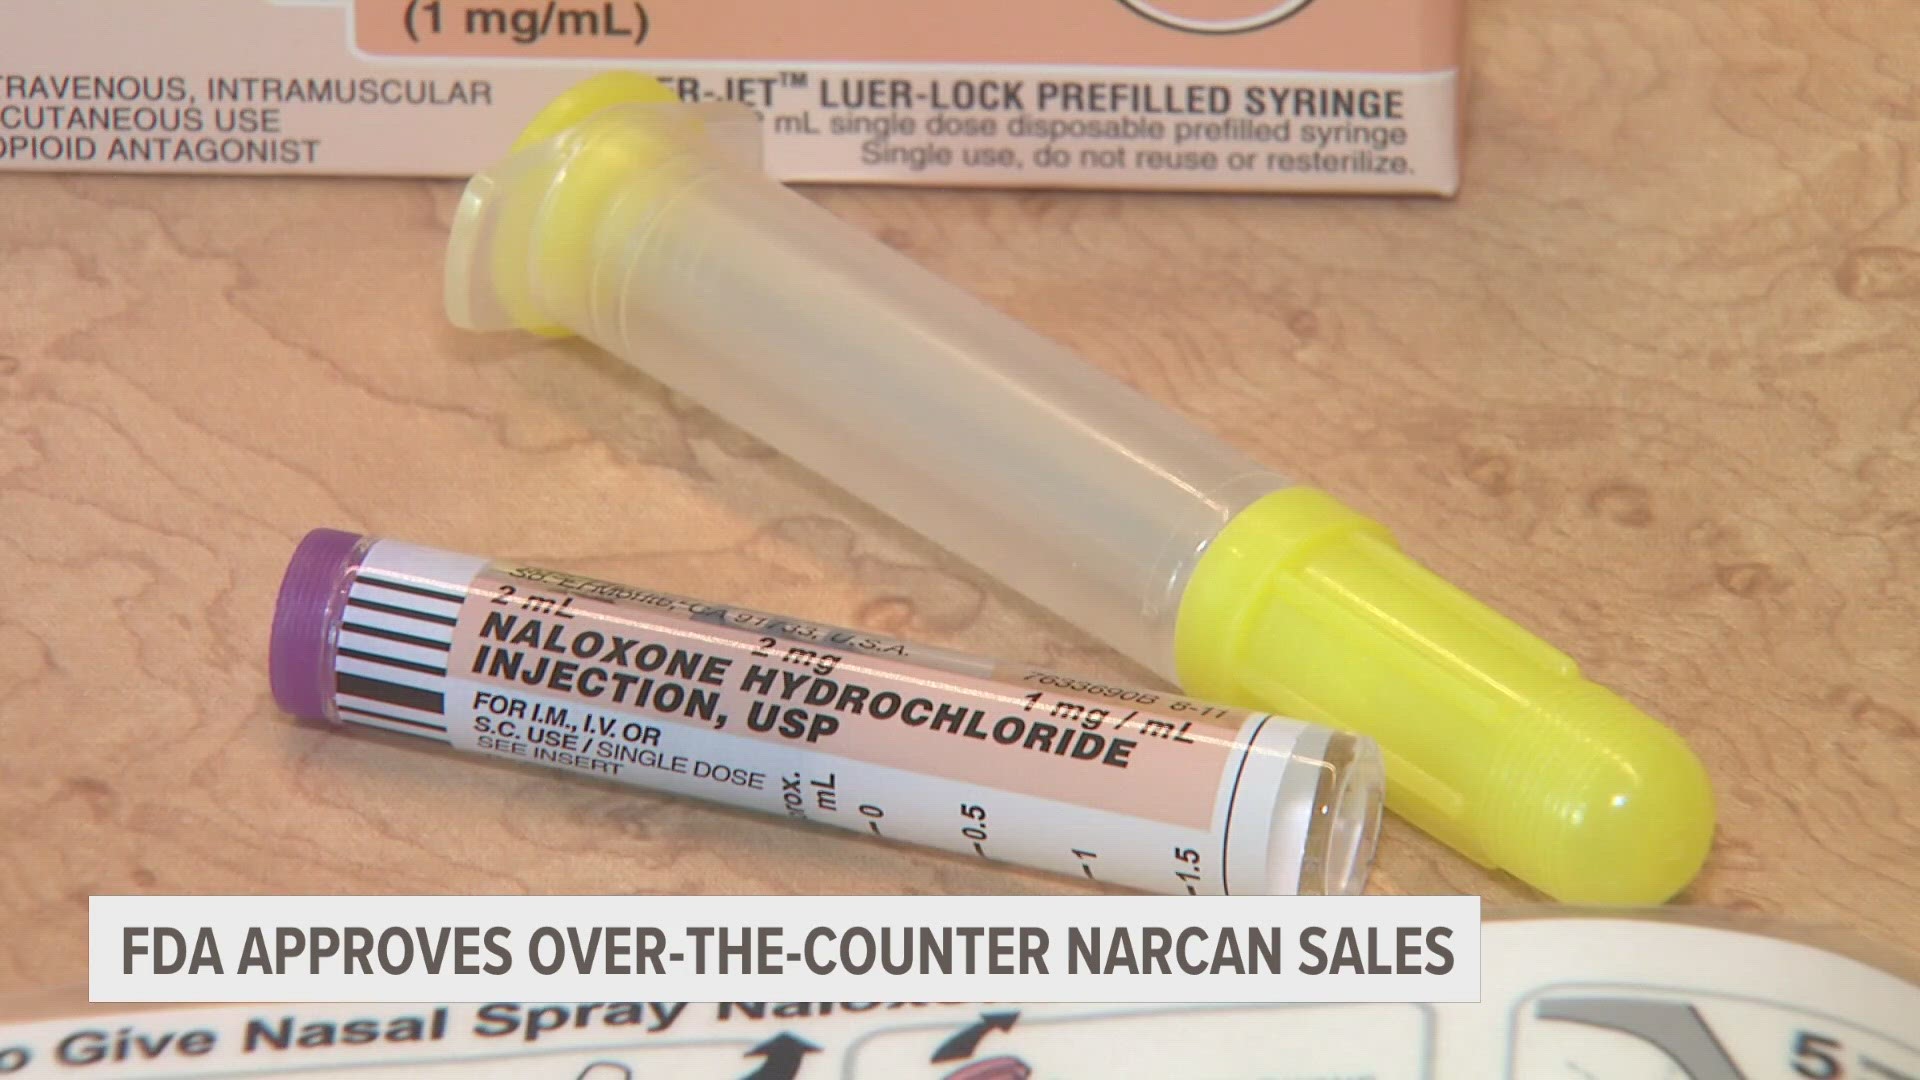 Local health officials say affordability and access is something that still needs to be addressed with OTC Narcan.